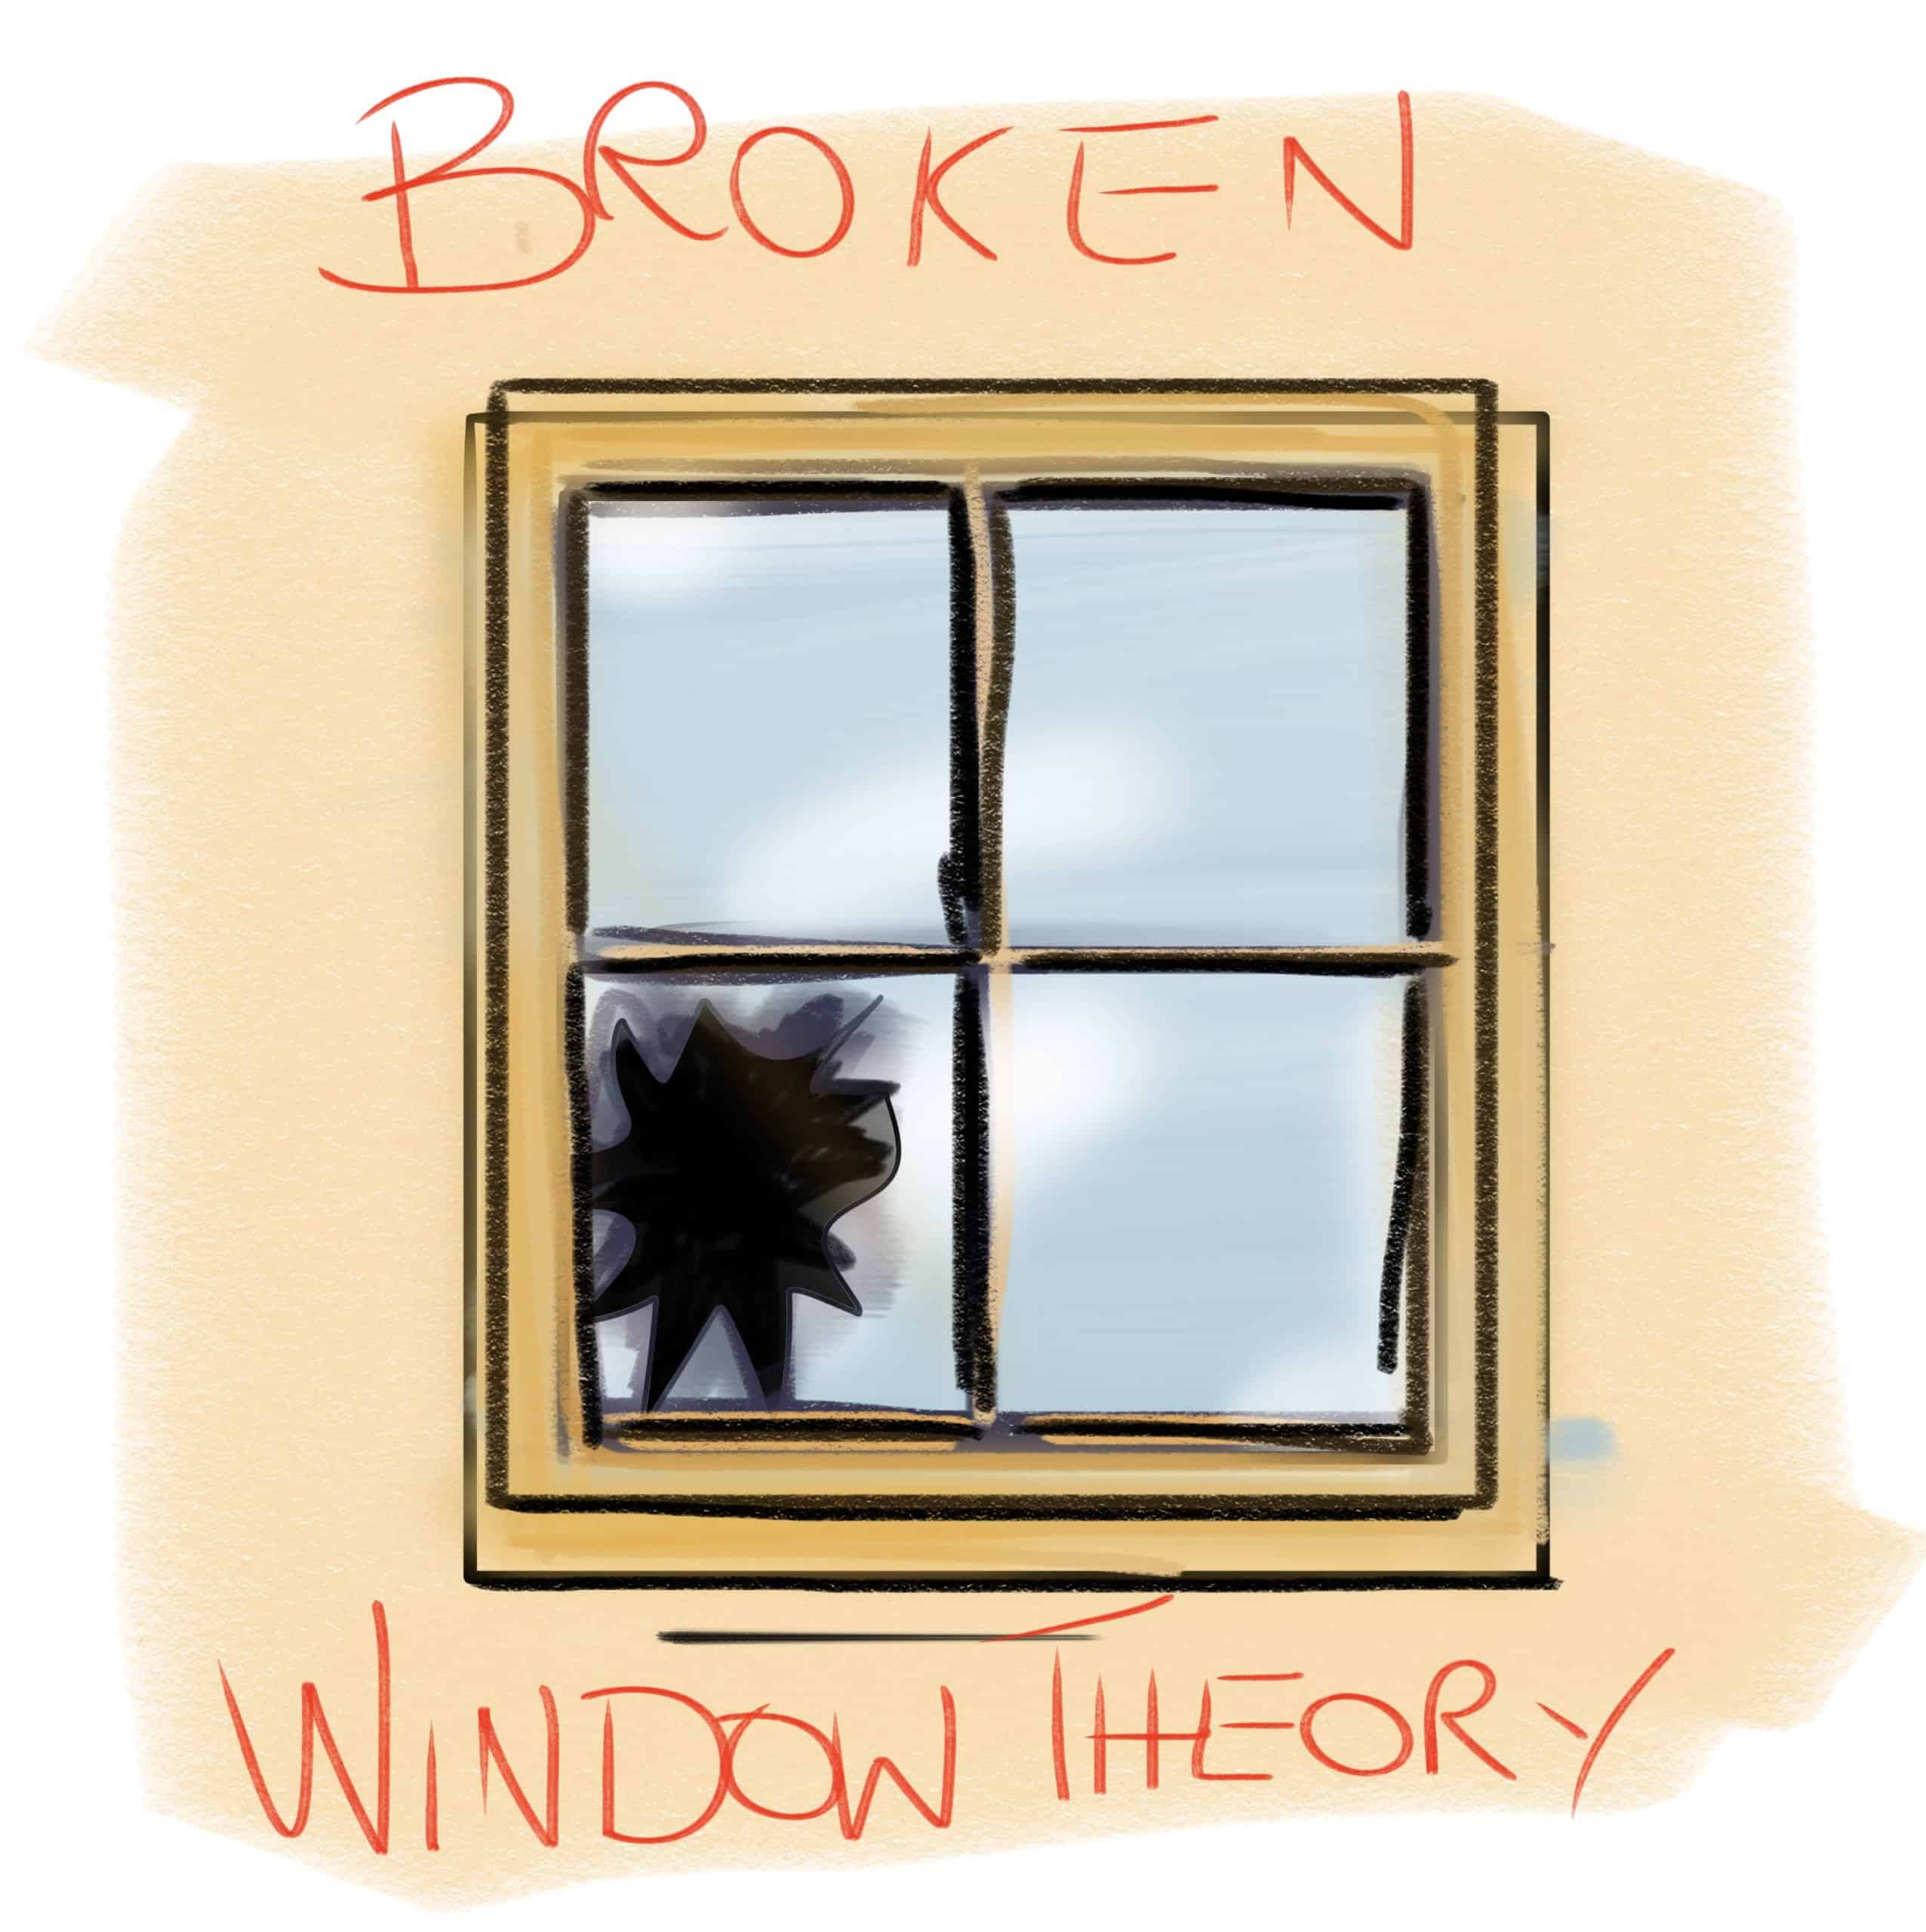 broken window theory reference